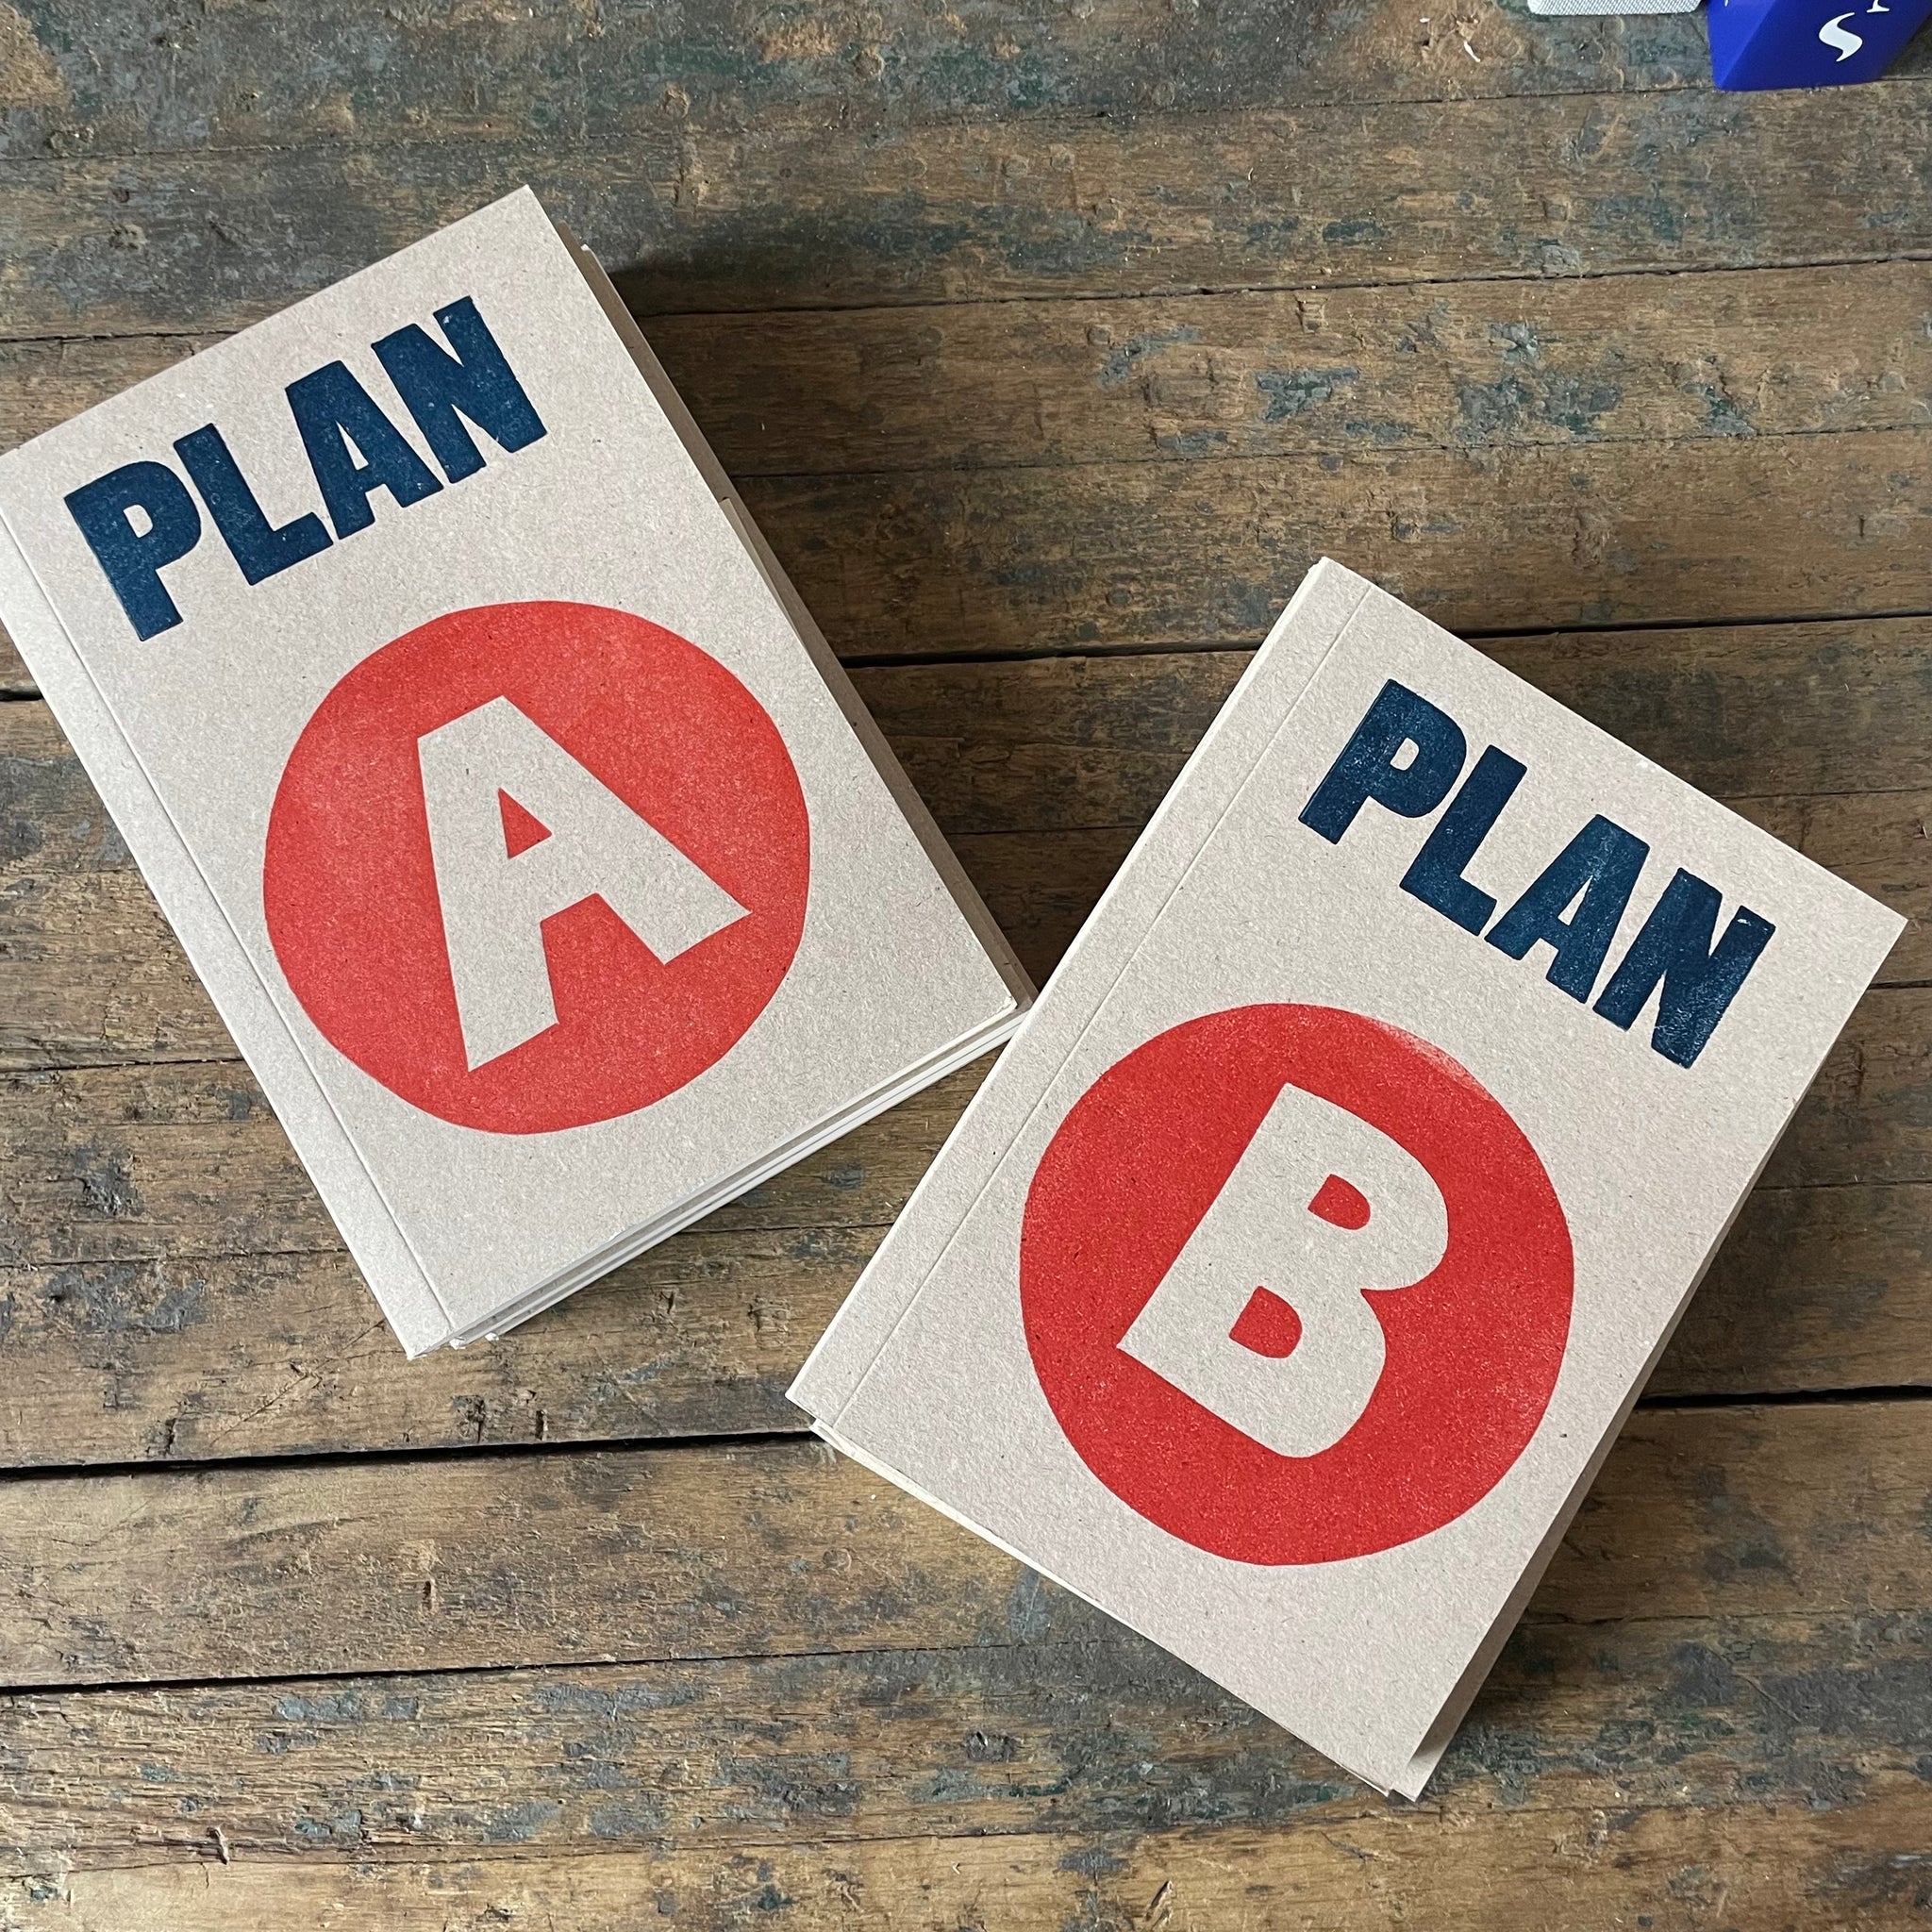 Plan A and Plan B Notebook by Sukie